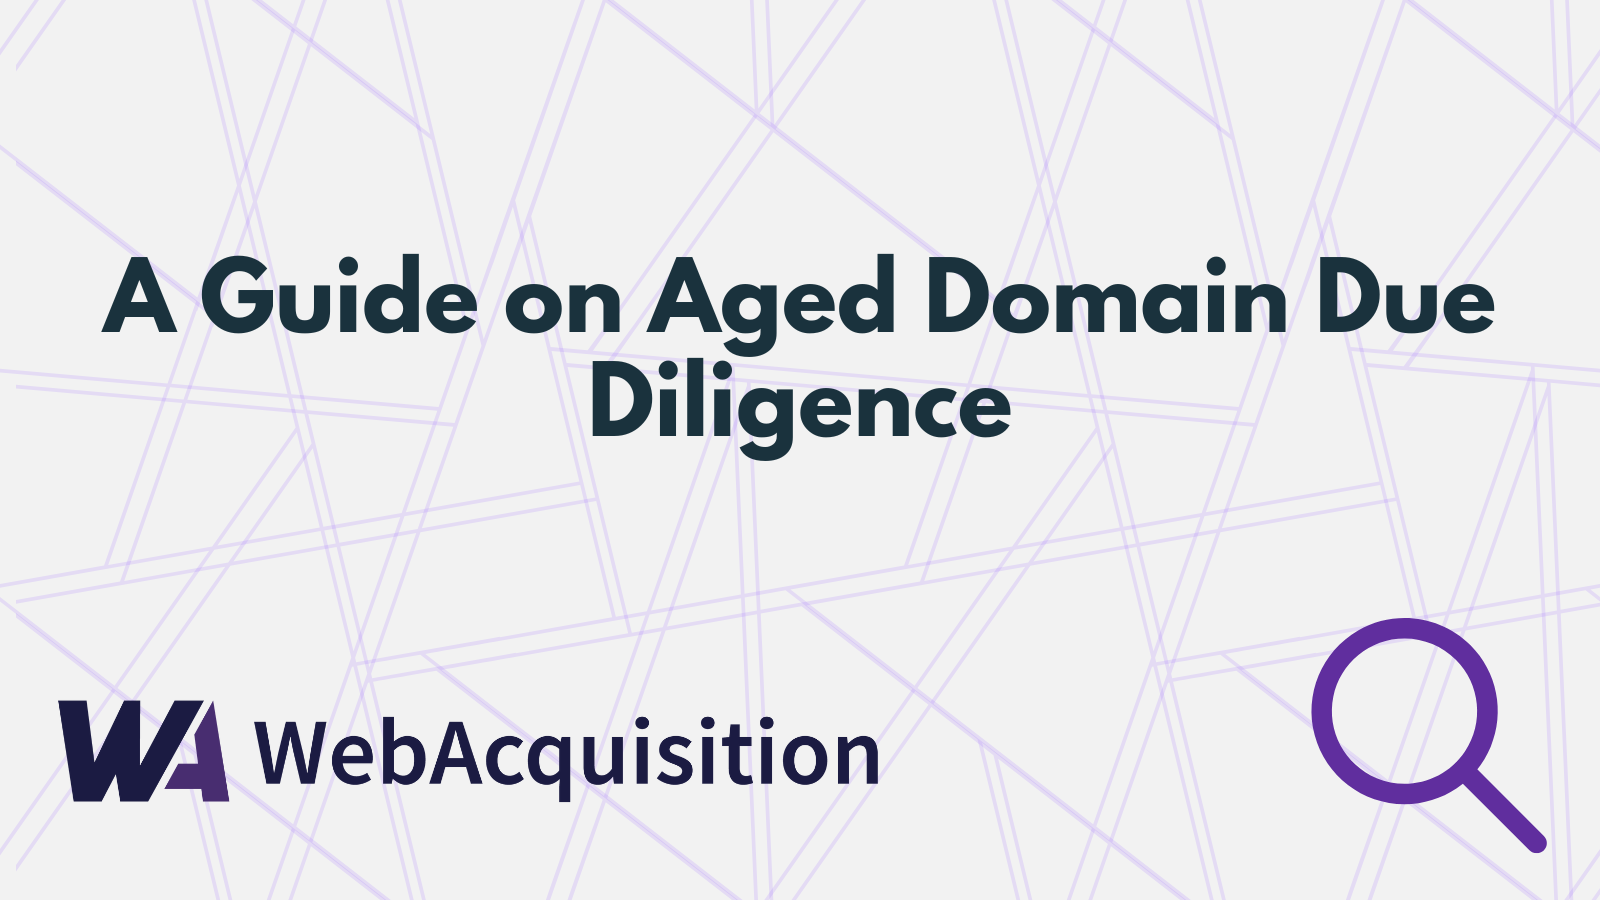 A guide on aged domain due diligence